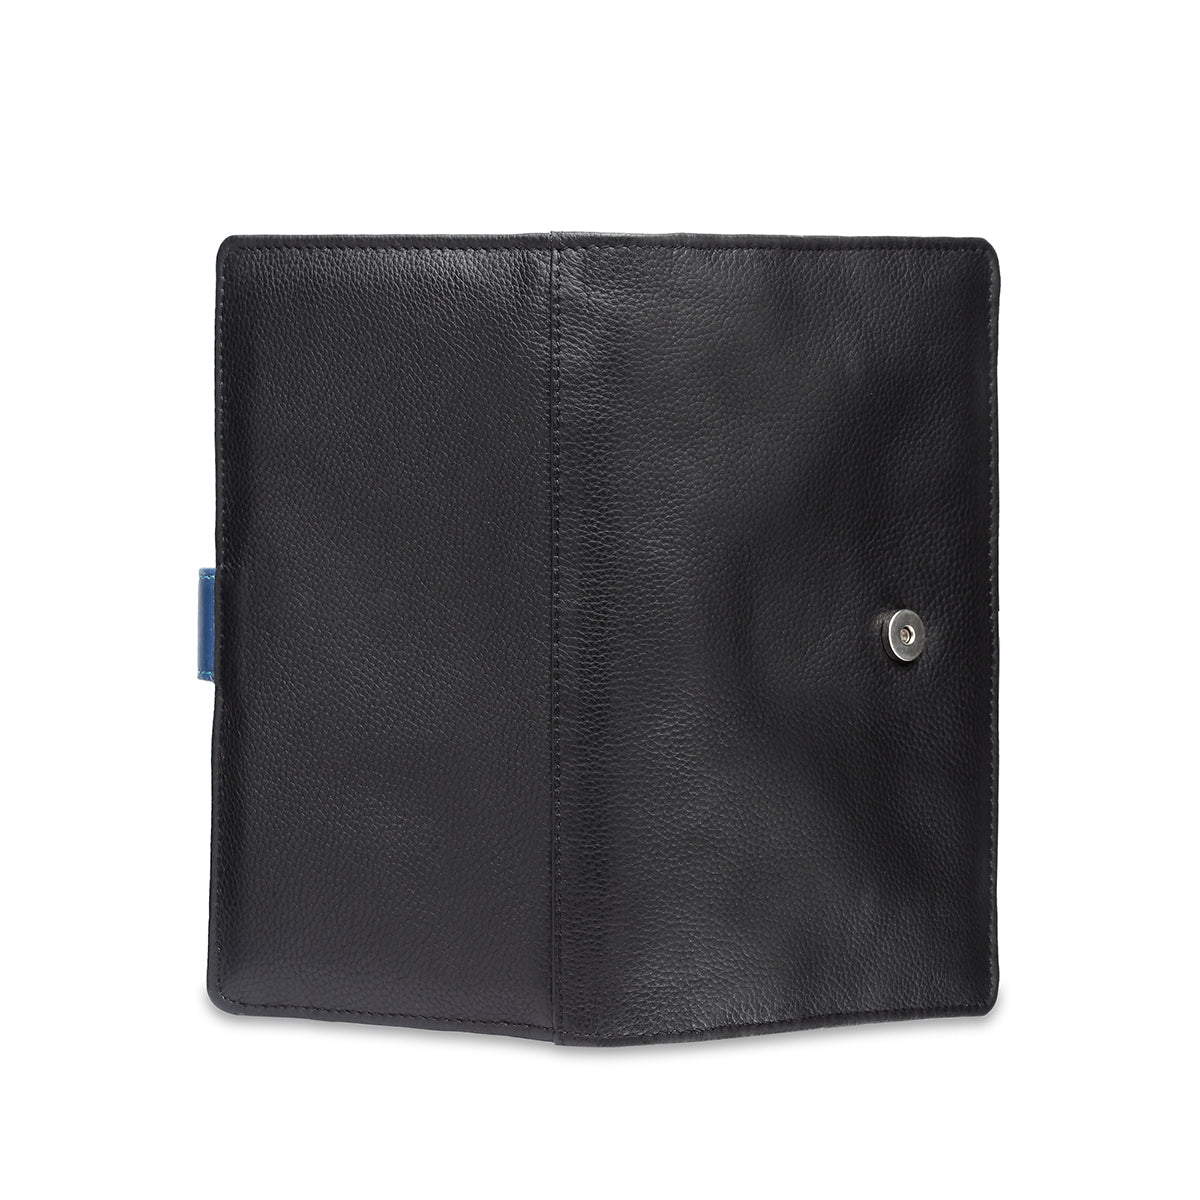 Classic Travel Wallet with luggage Tag